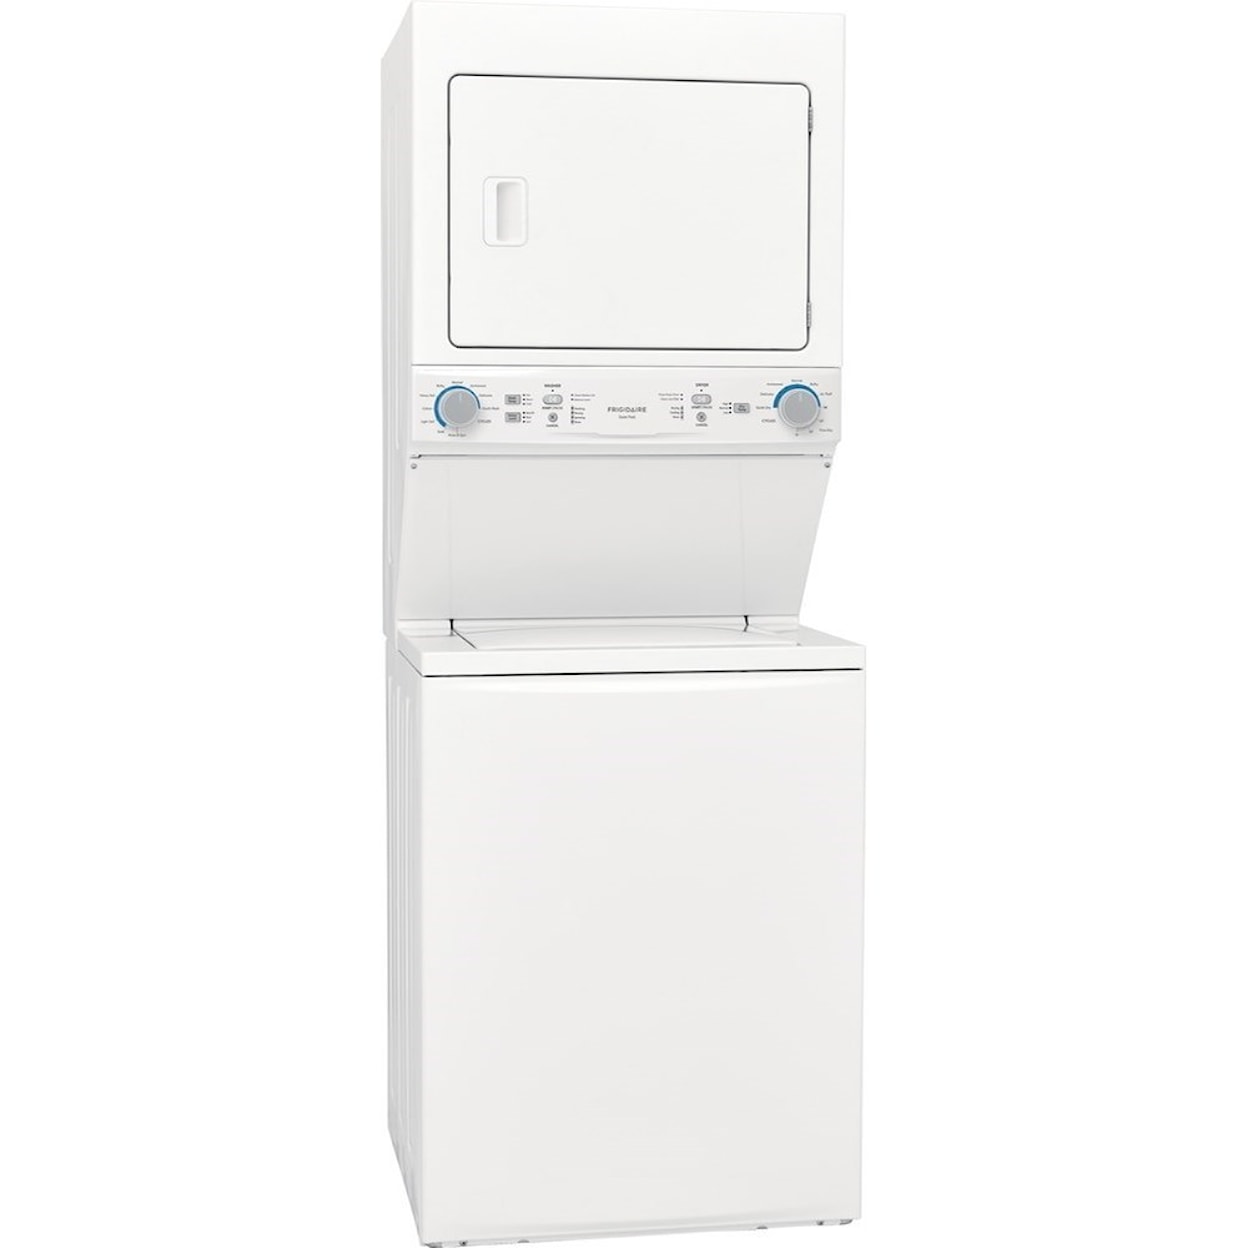 Frigidaire Washer and Dryer Combo Gas Washer/Dryer Laundry Center